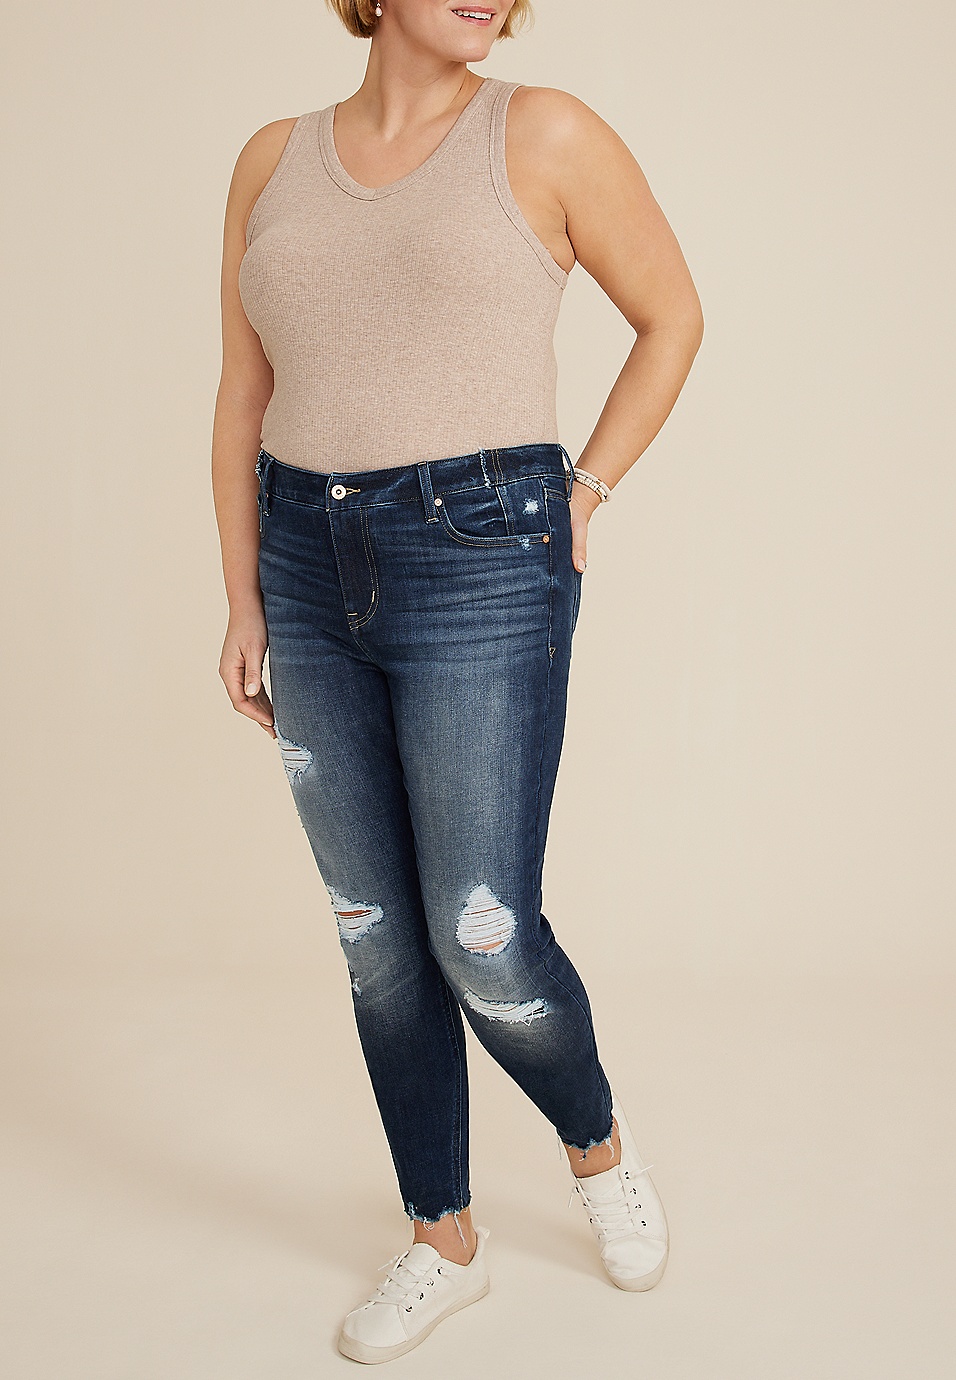 Plus Size edgely™ Curvy High Rise Ripped Super Skinny Jean